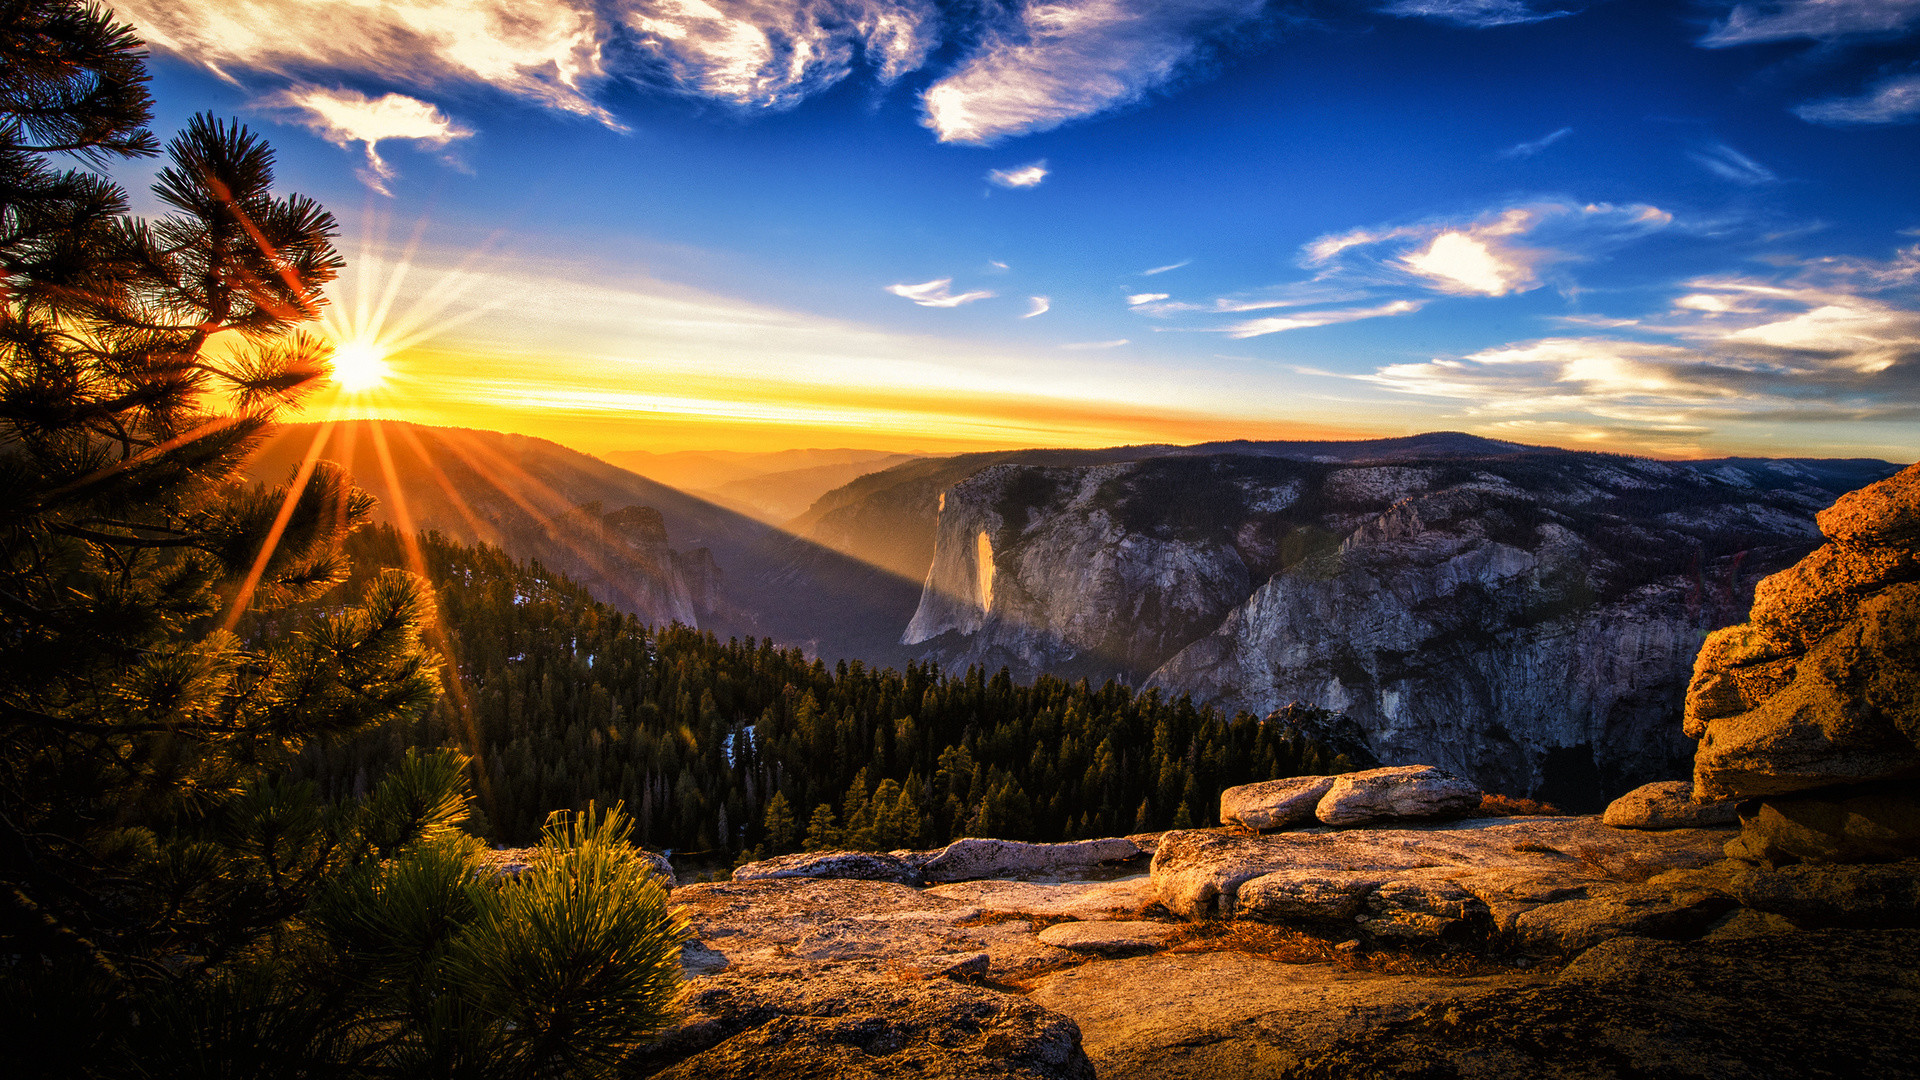 1920x1080 Mountain Wallpapers Wide – Epic Wallpaperz Images of Mountain Sunset Wallpapers  Wide - #SC ...